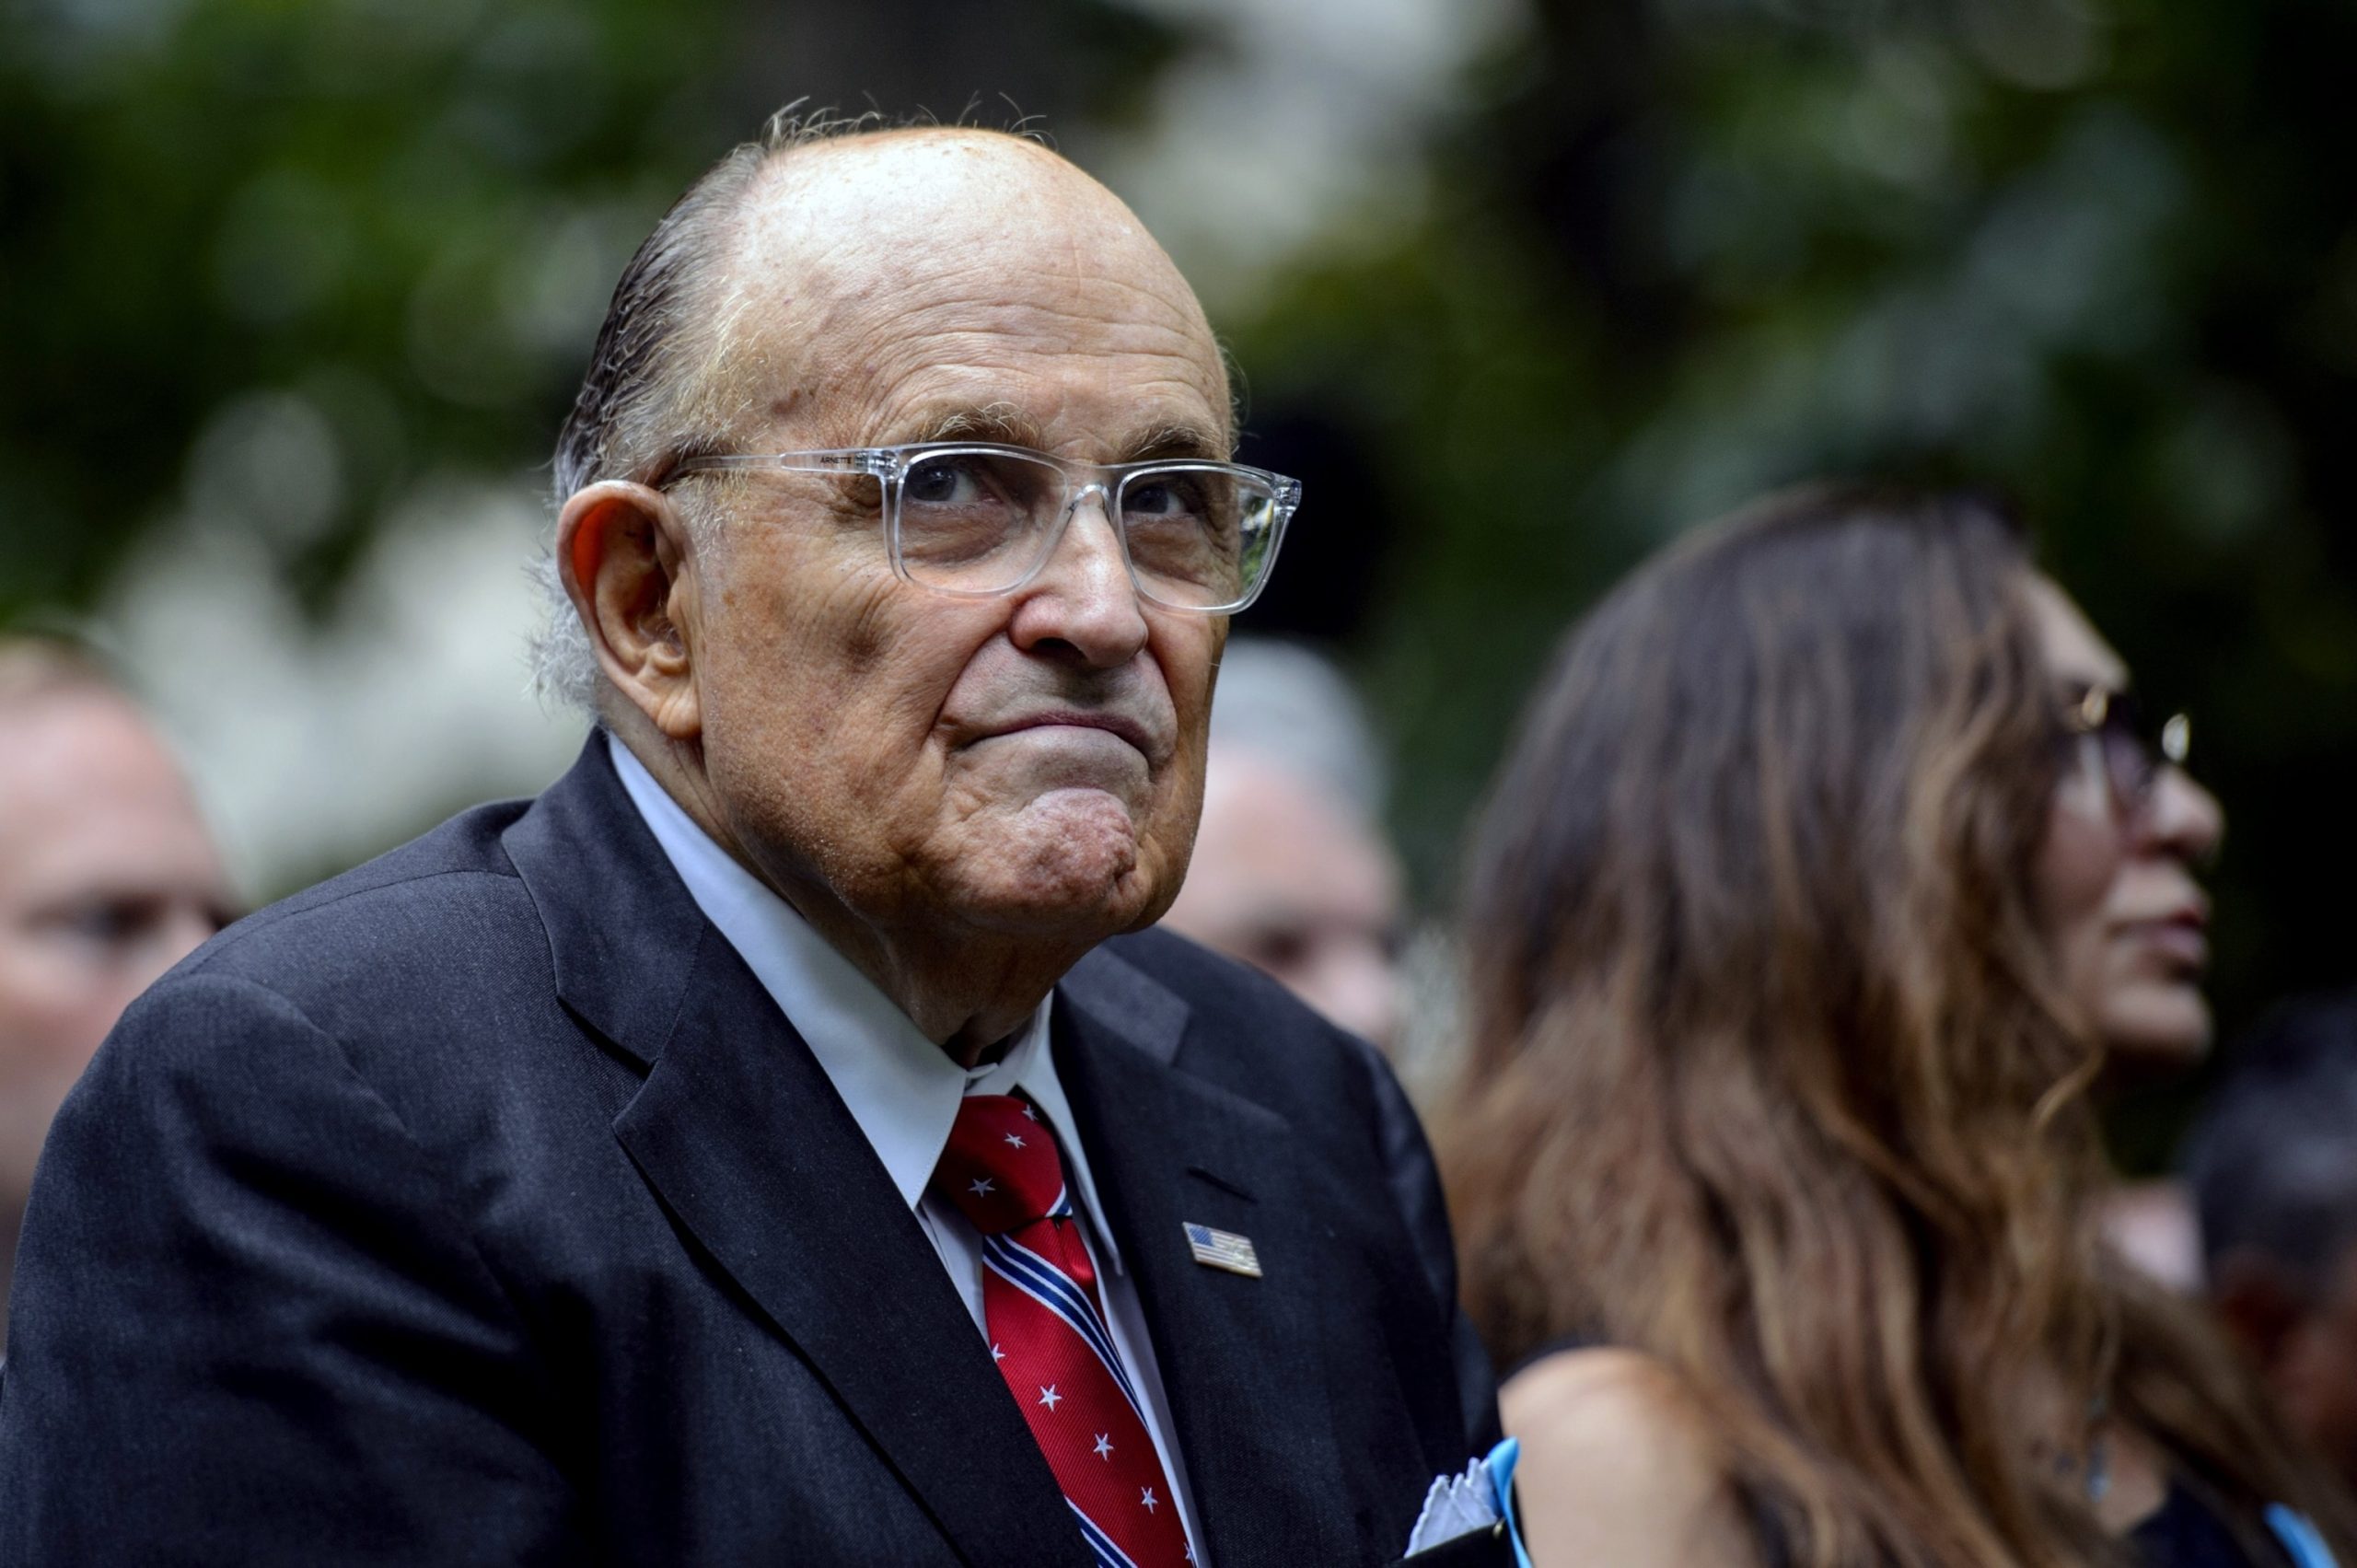 Rudy Giuliani Disbarred for Making False and Misleading Statements About the 2020 Election